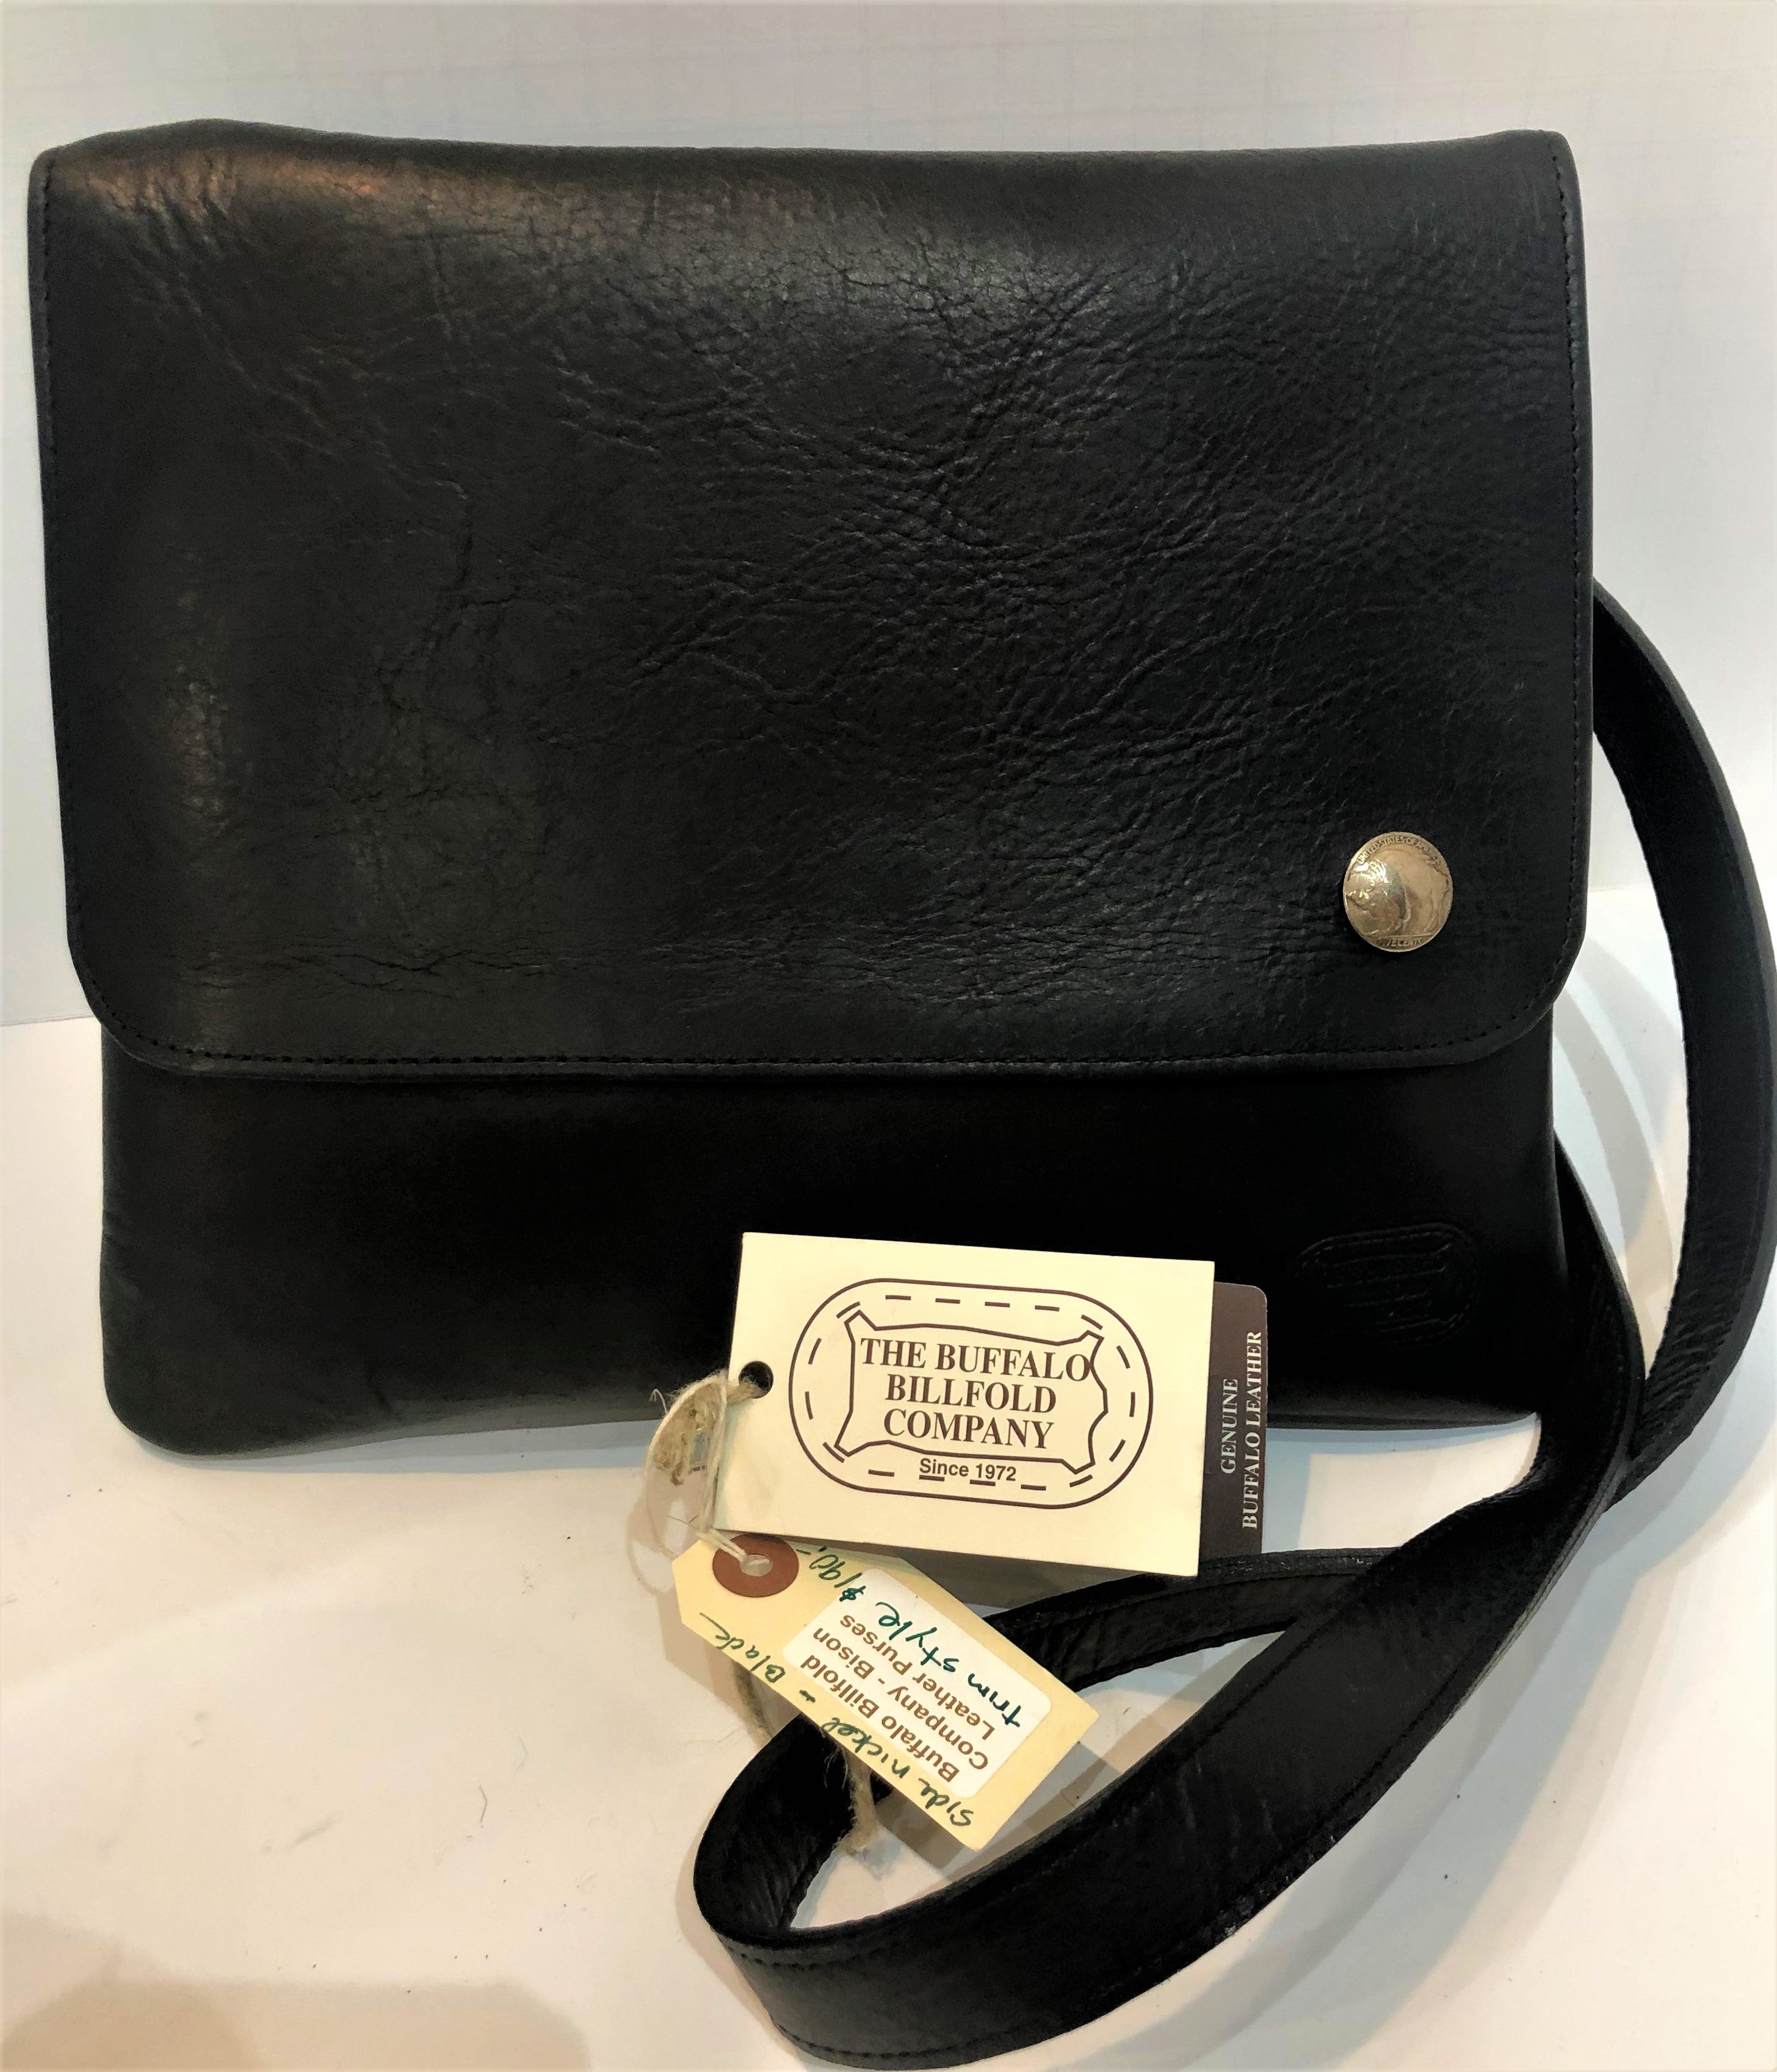 Tom Taylor Belts, Buckles, Bags - The Yellowstone Collection by Billy  Sunday, handmade American bison bags. https://bit.ly/yellowstonebisonbags |  Facebook